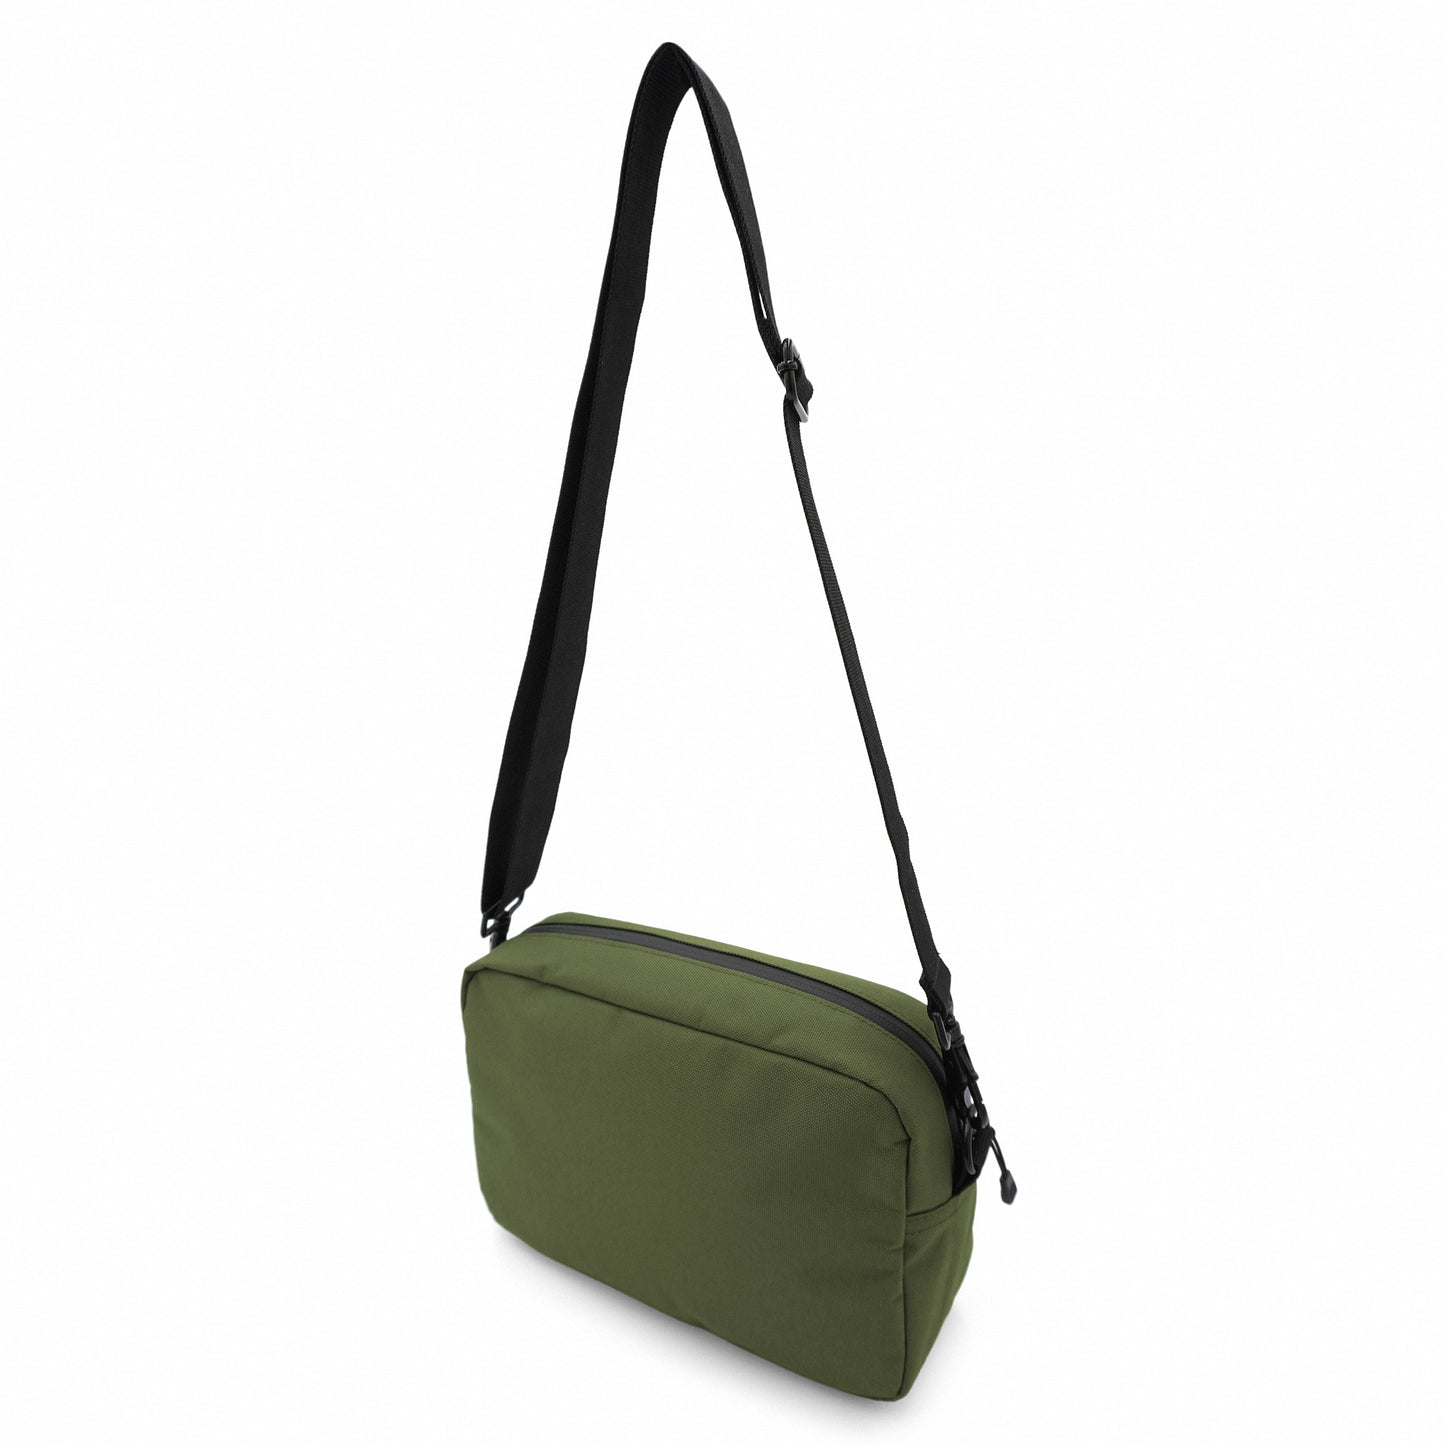 Back of the olive green Rover bag with shoulder strap being suspended in air